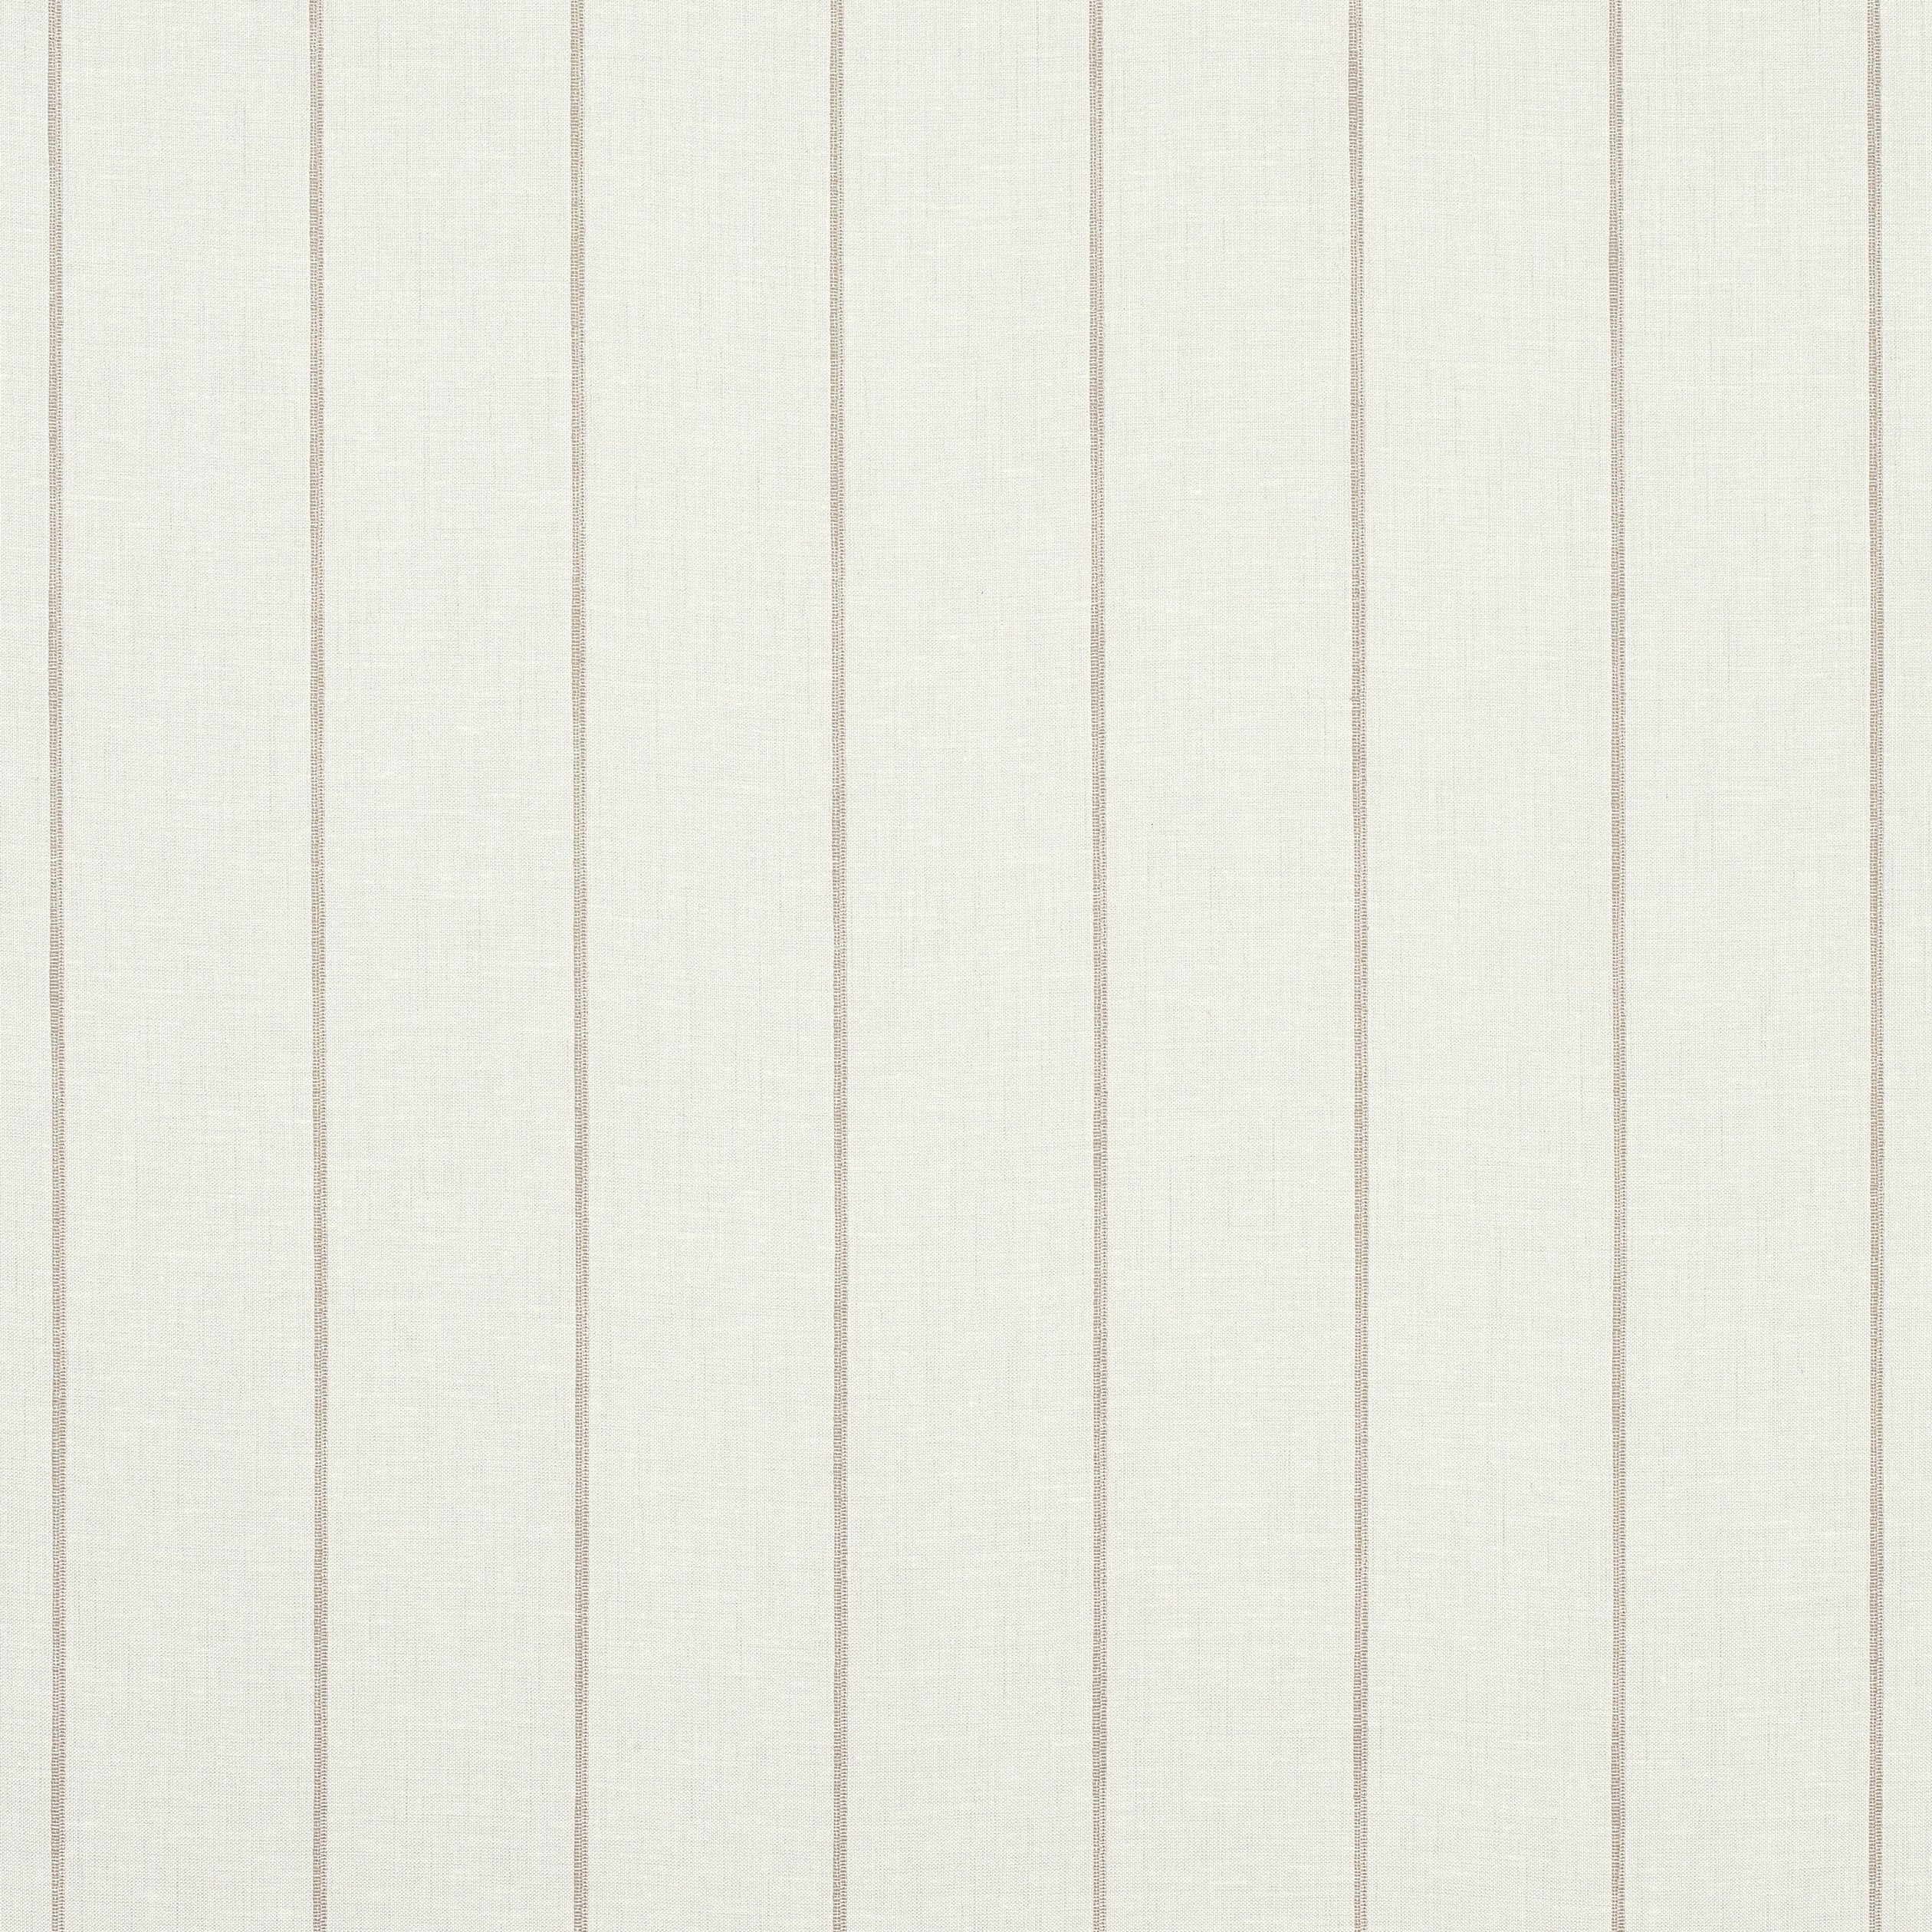 Berkshire Stripe fabric in smoke color - pattern number FWW7162 - by Thibaut in the Atmosphere collection